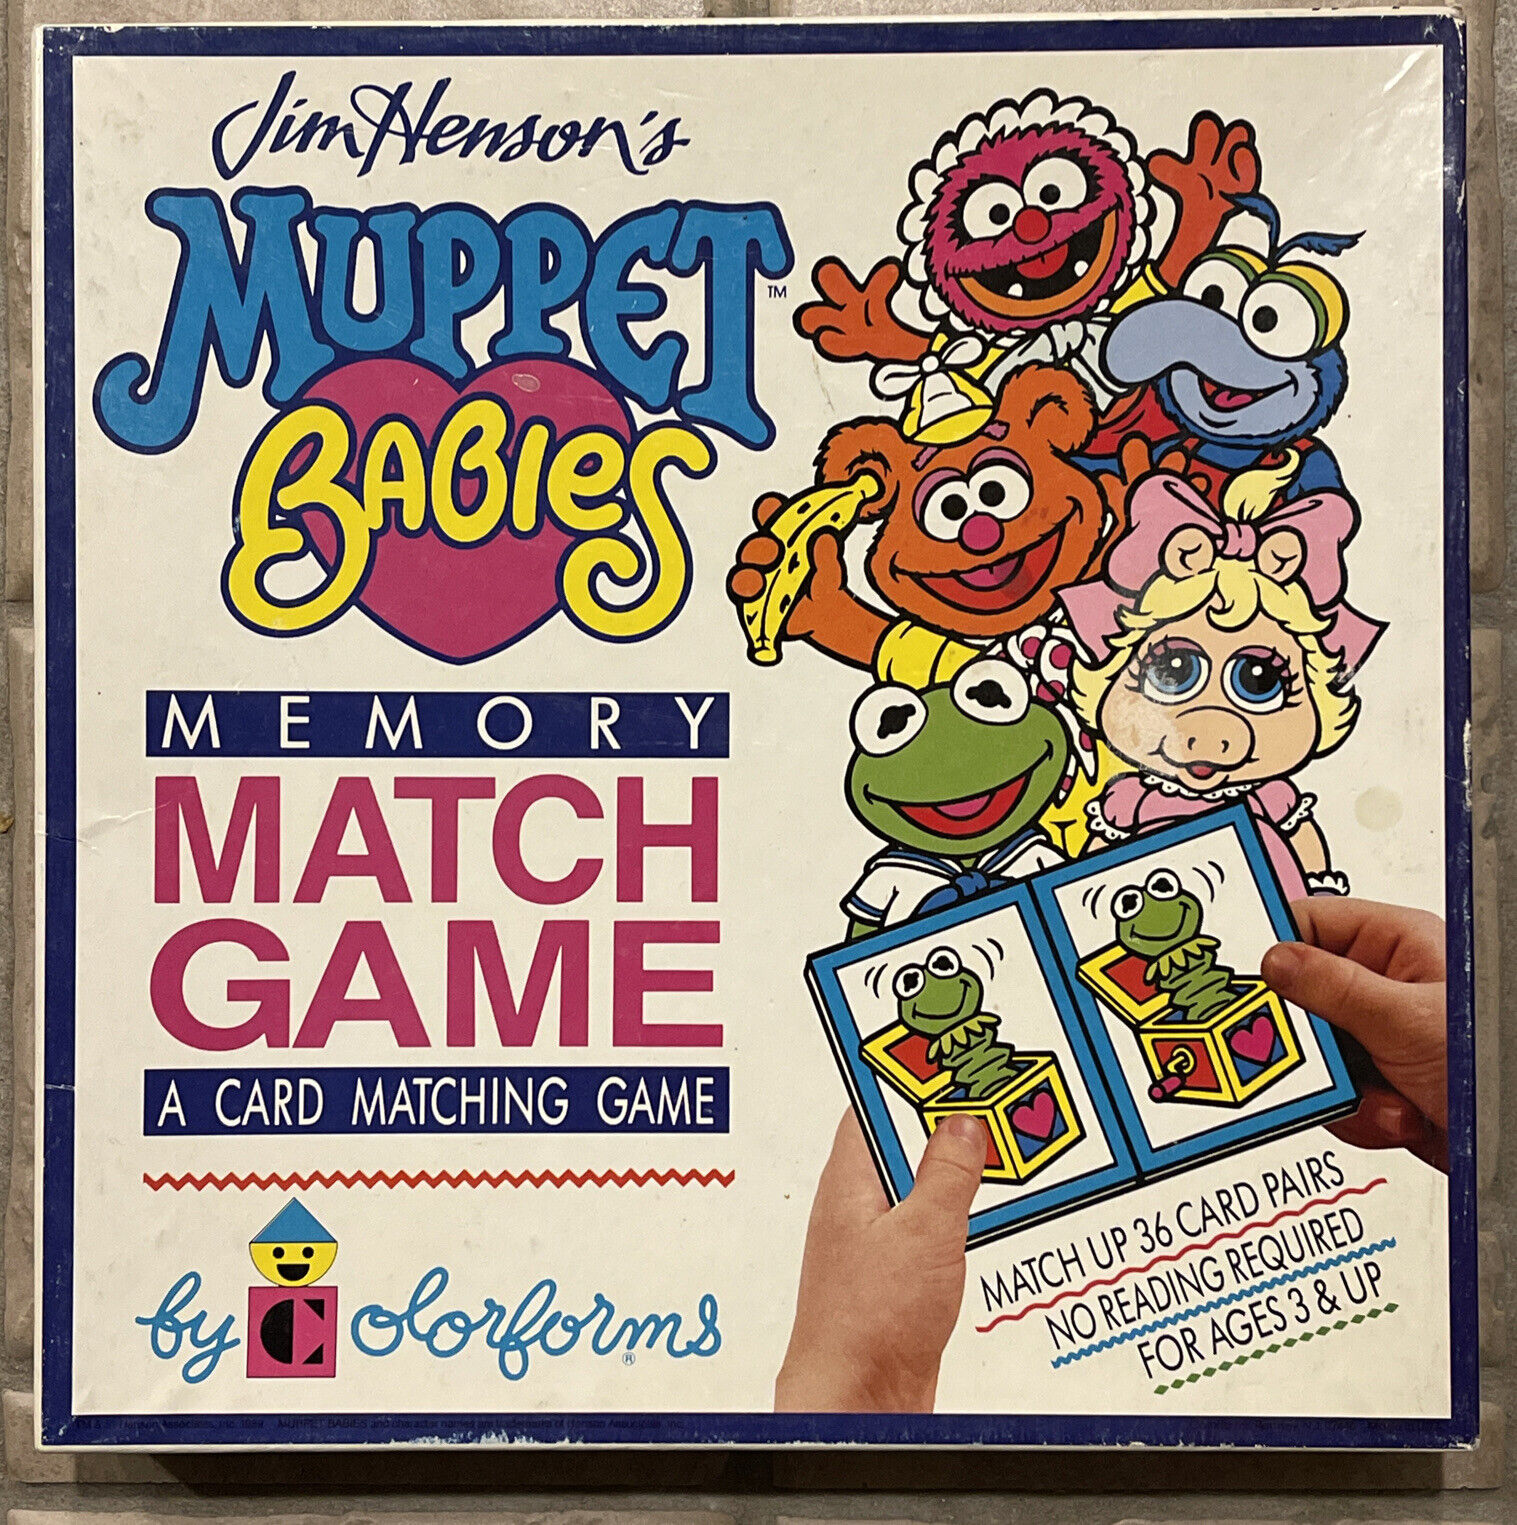 Jim Henson’s Muppet Babies Memory Match Game 1989 by Colorforms Complete